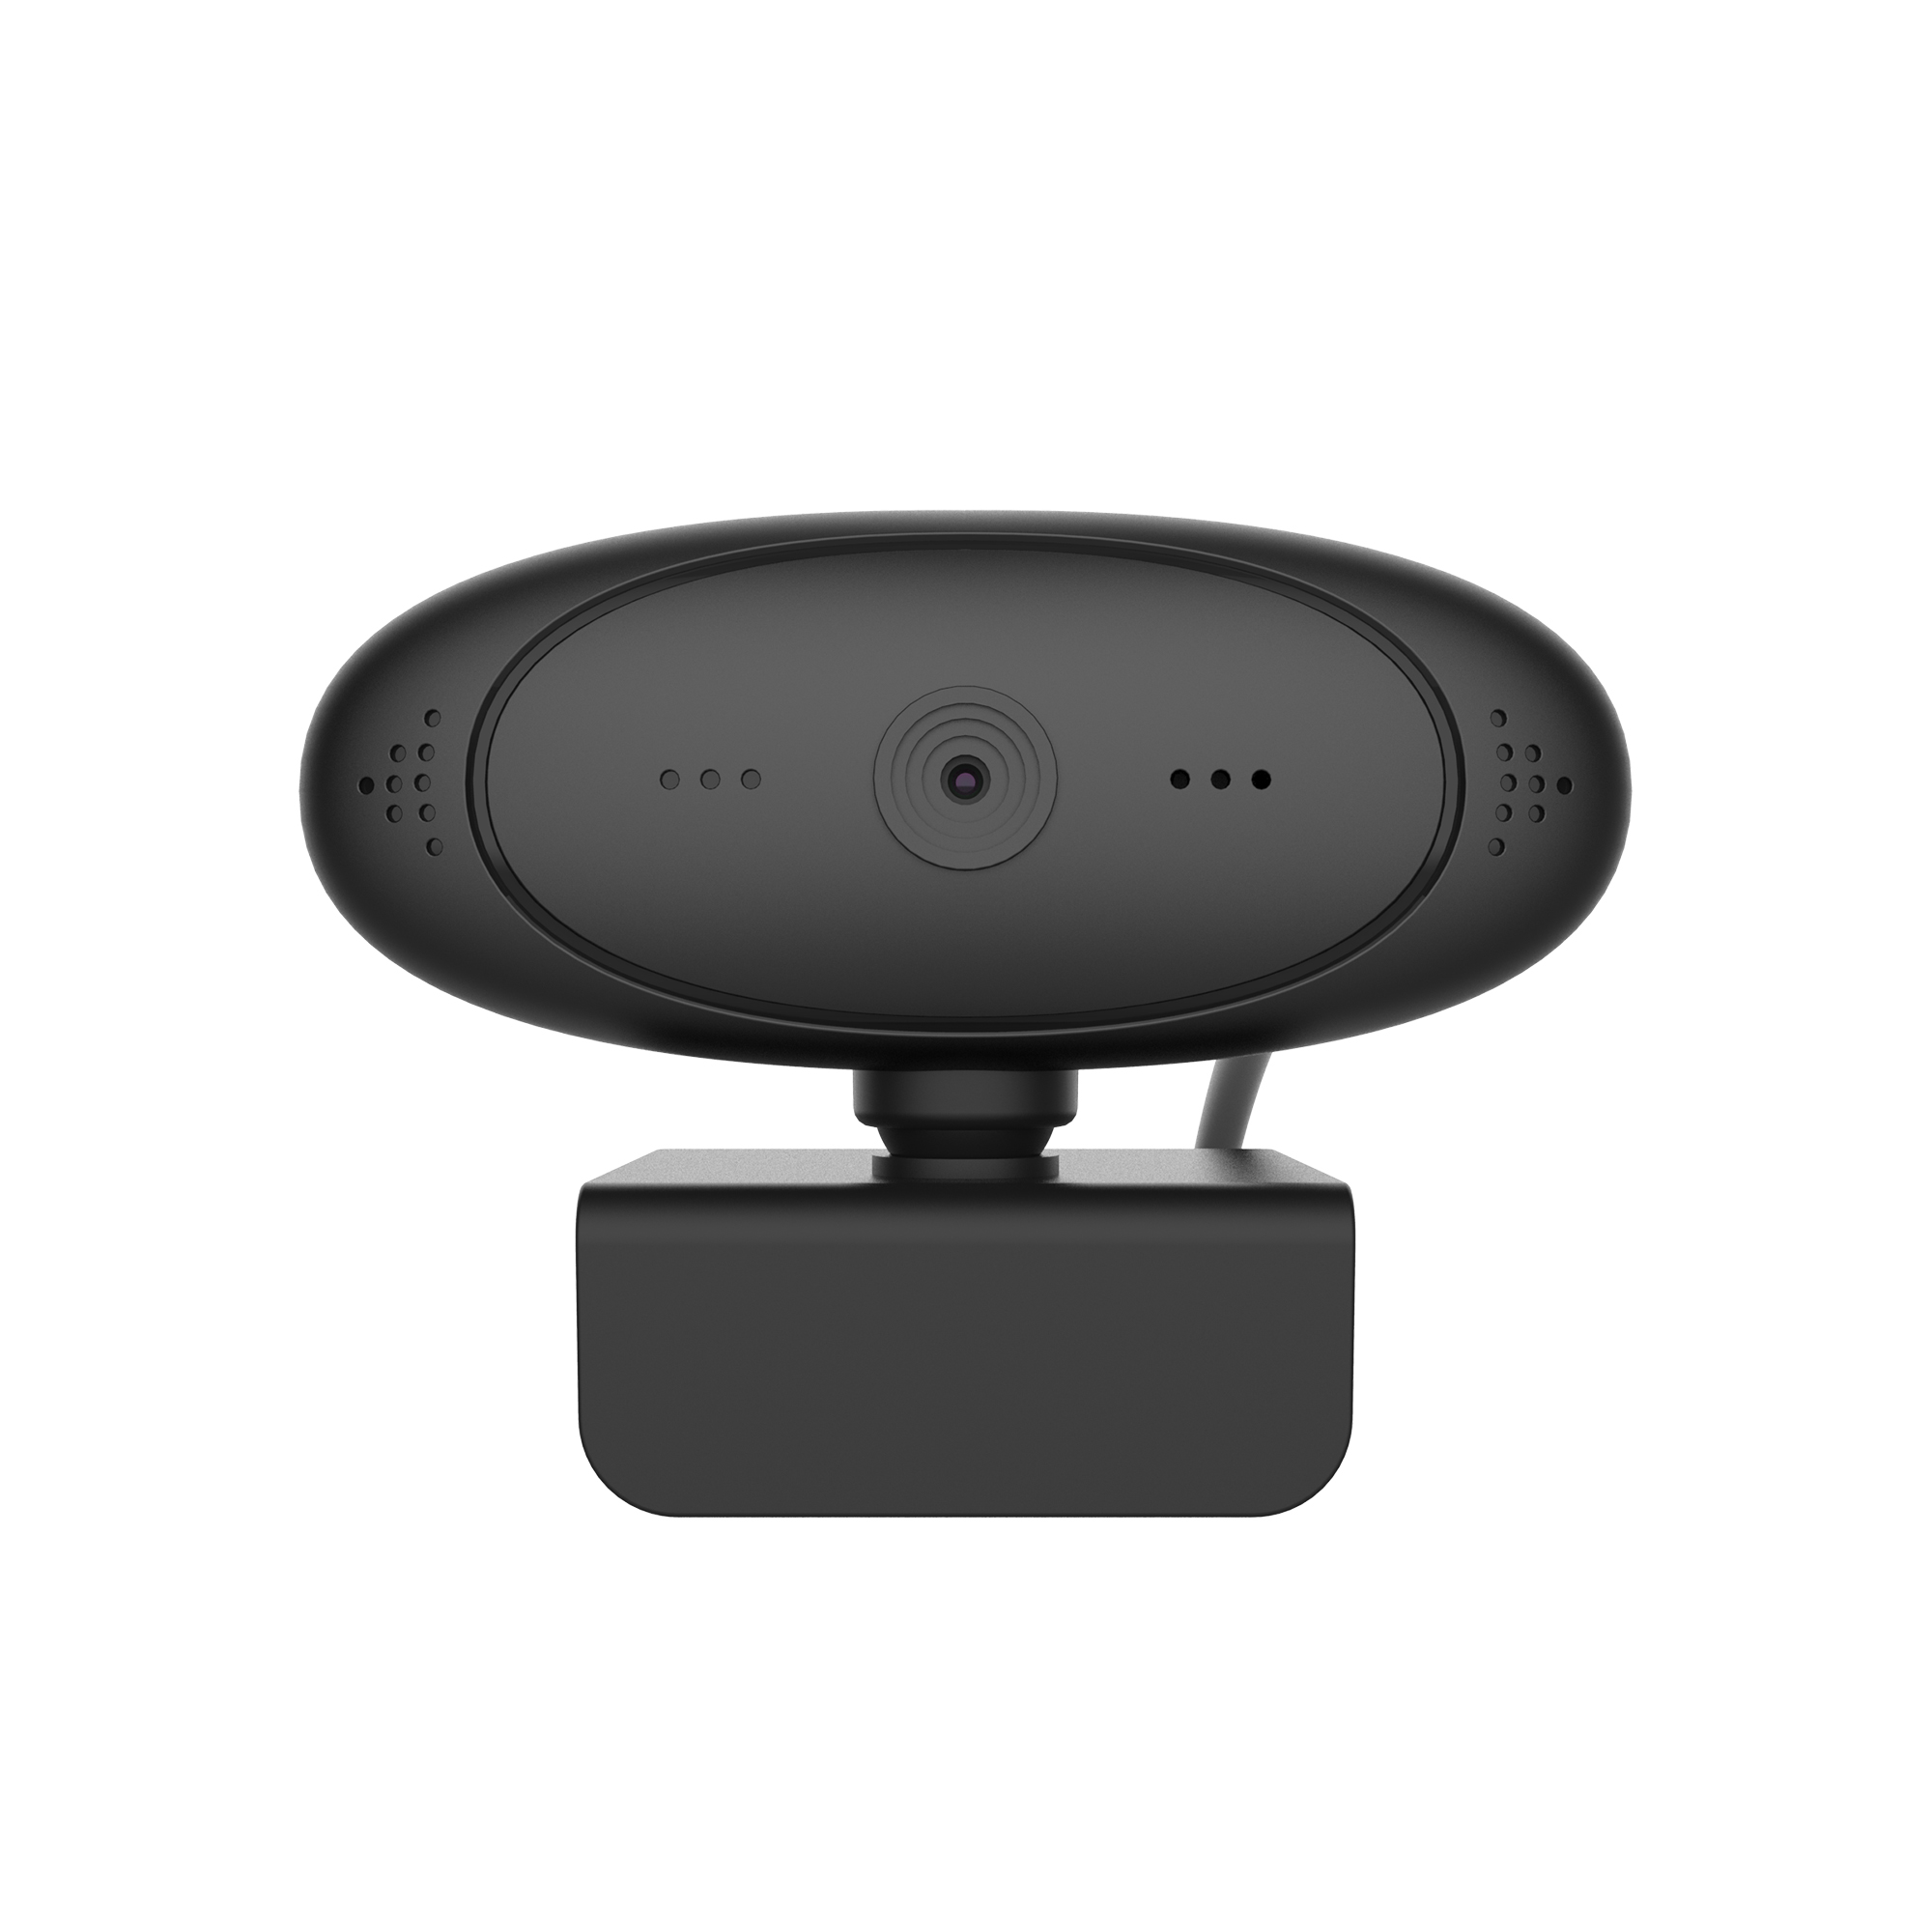 Mini USB Web Camera Full HD 1080p With Microphone For Video Conference black